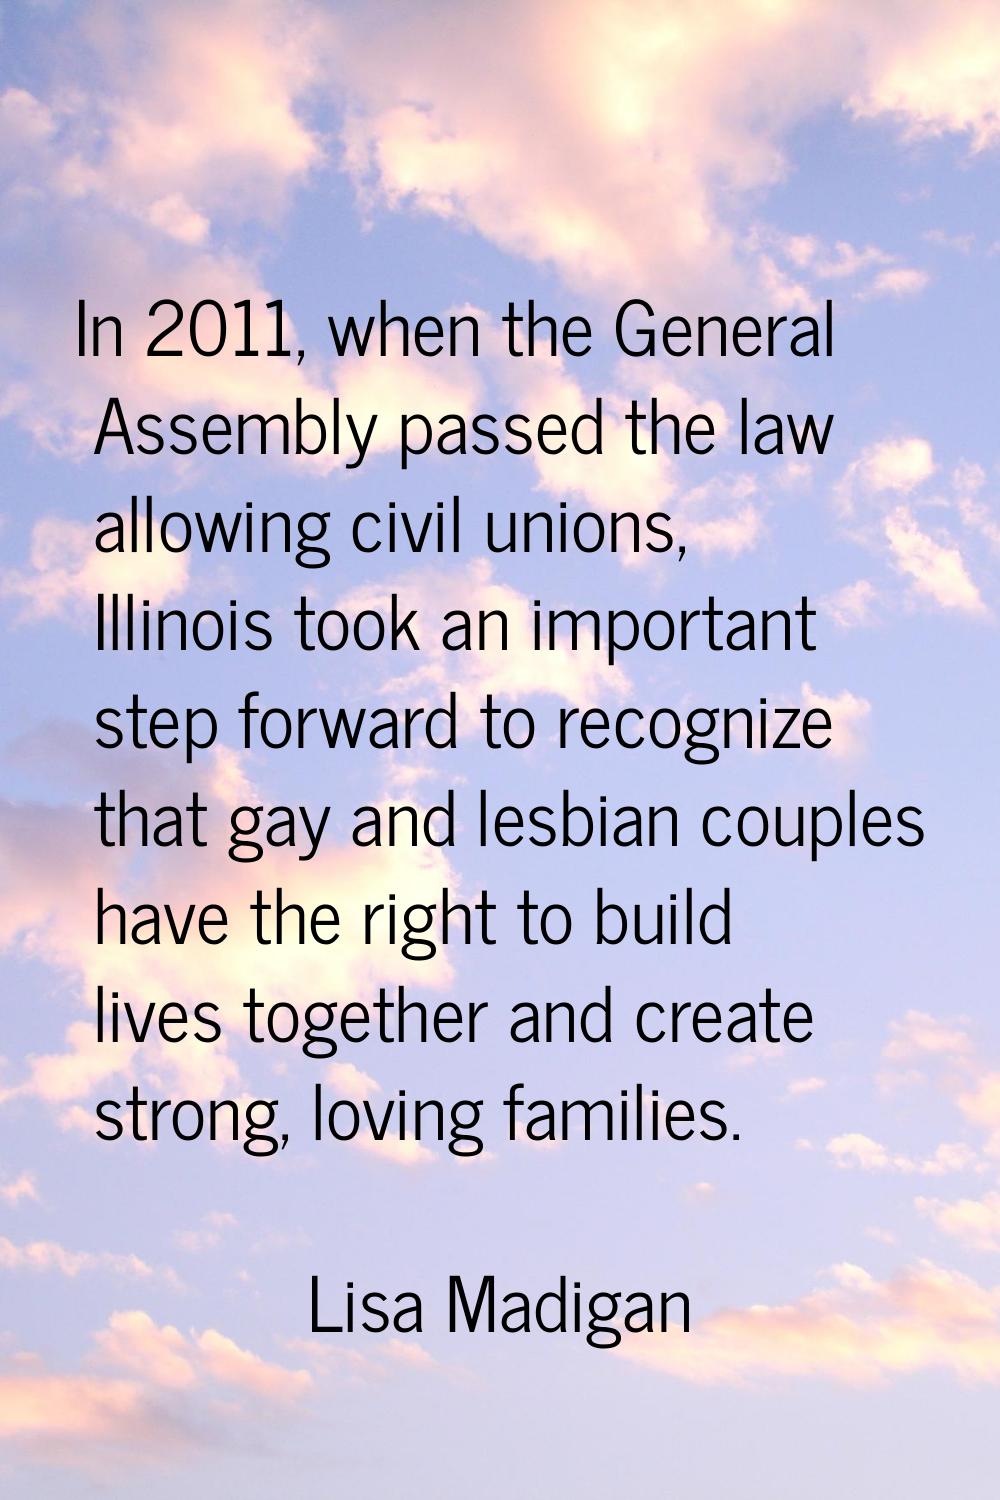 In 2011, when the General Assembly passed the law allowing civil unions, Illinois took an important